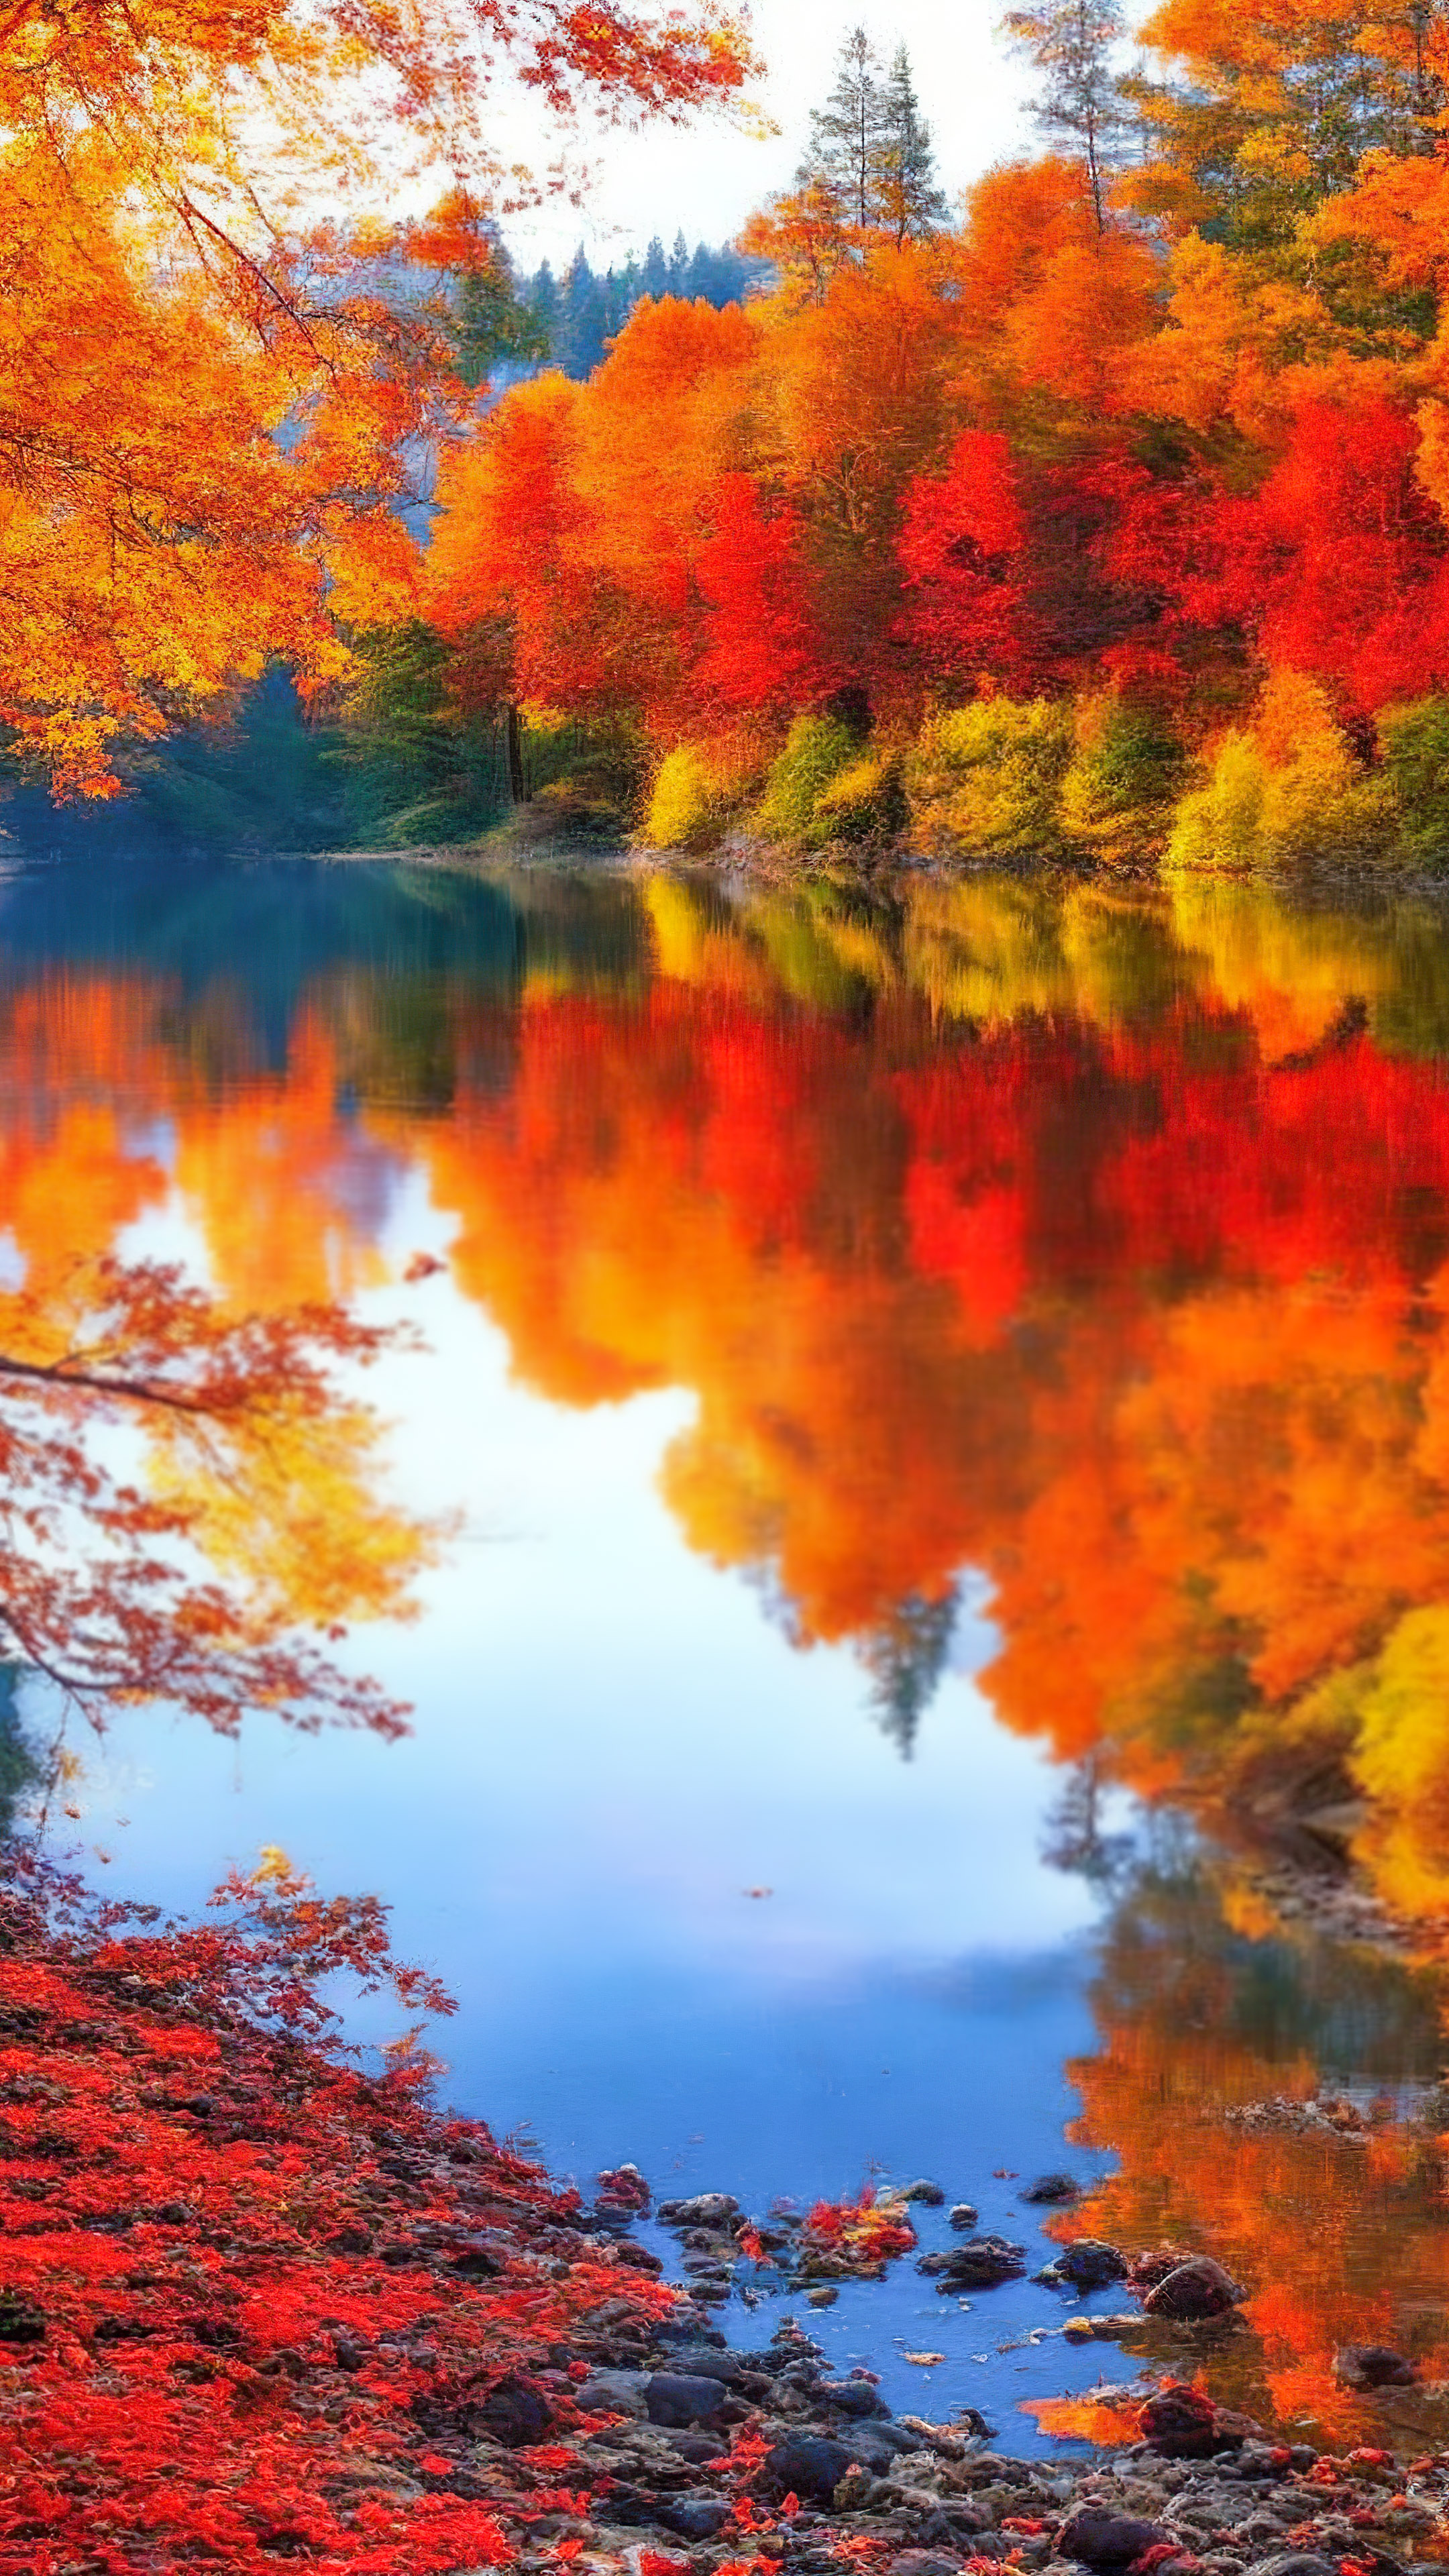 Adorn your iPhone with a nature wallpaper in HD, showcasing a tranquil lake surrounded by vibrant autumn foliage, mirrored in the clear, still water.